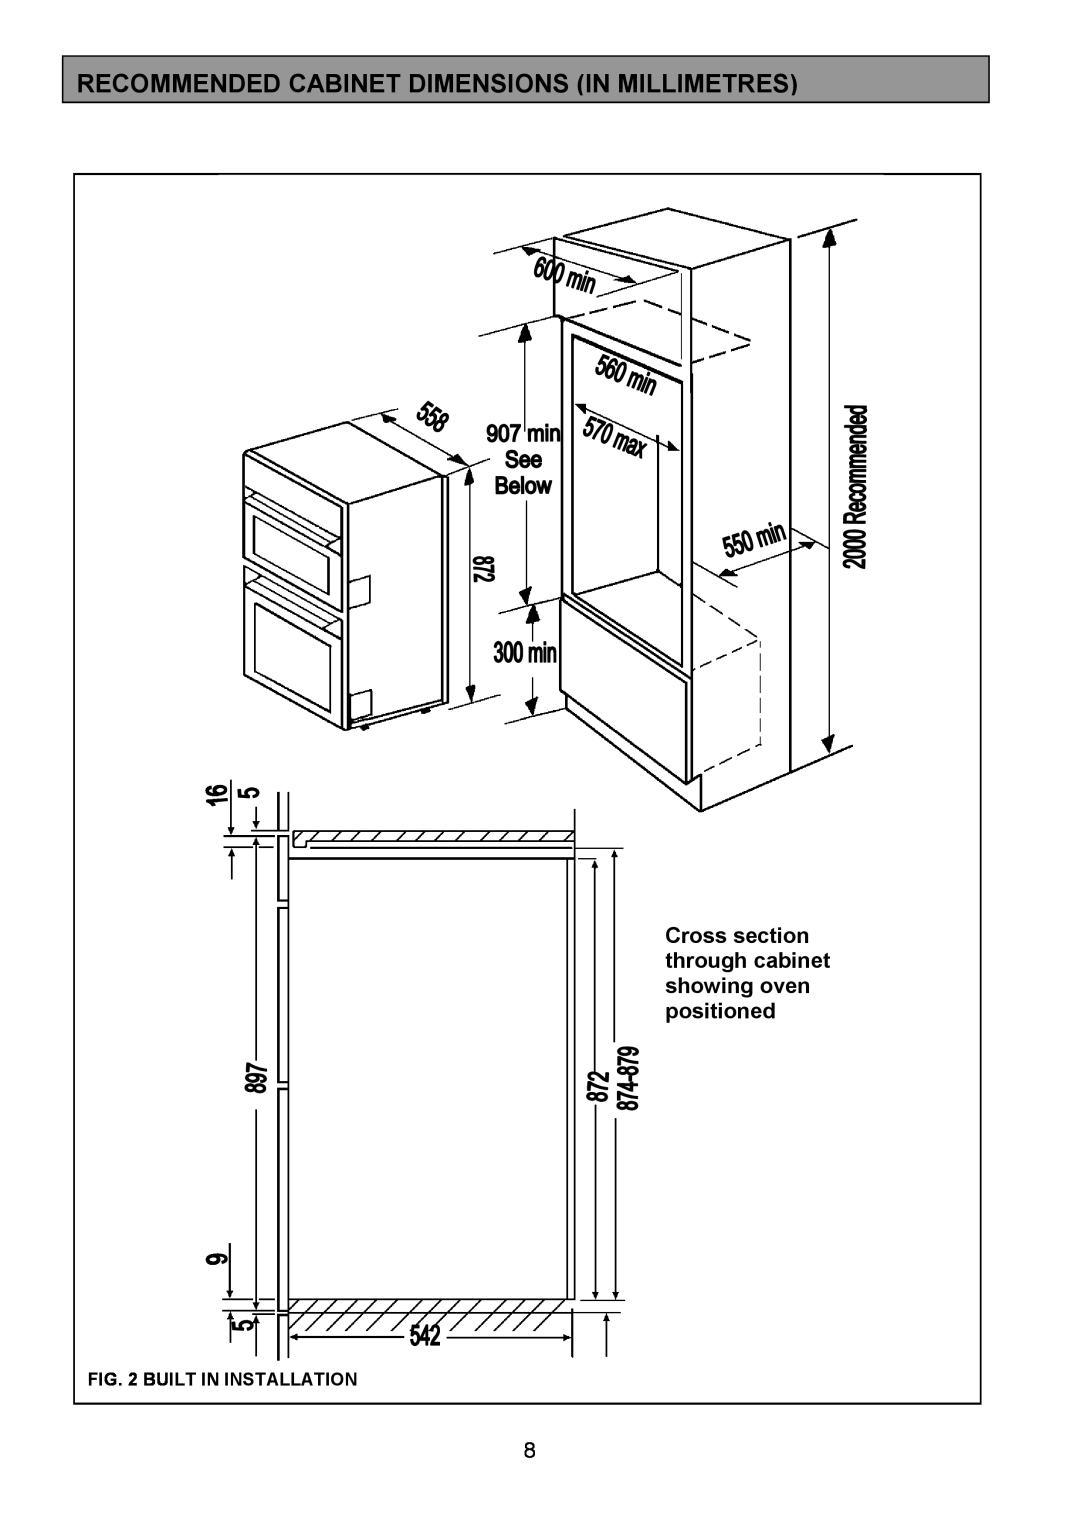 Zanussi ZDQ 695 manual Recommended Cabinet Dimensions In Millimetres, Cross section through cabinet showing oven positioned 